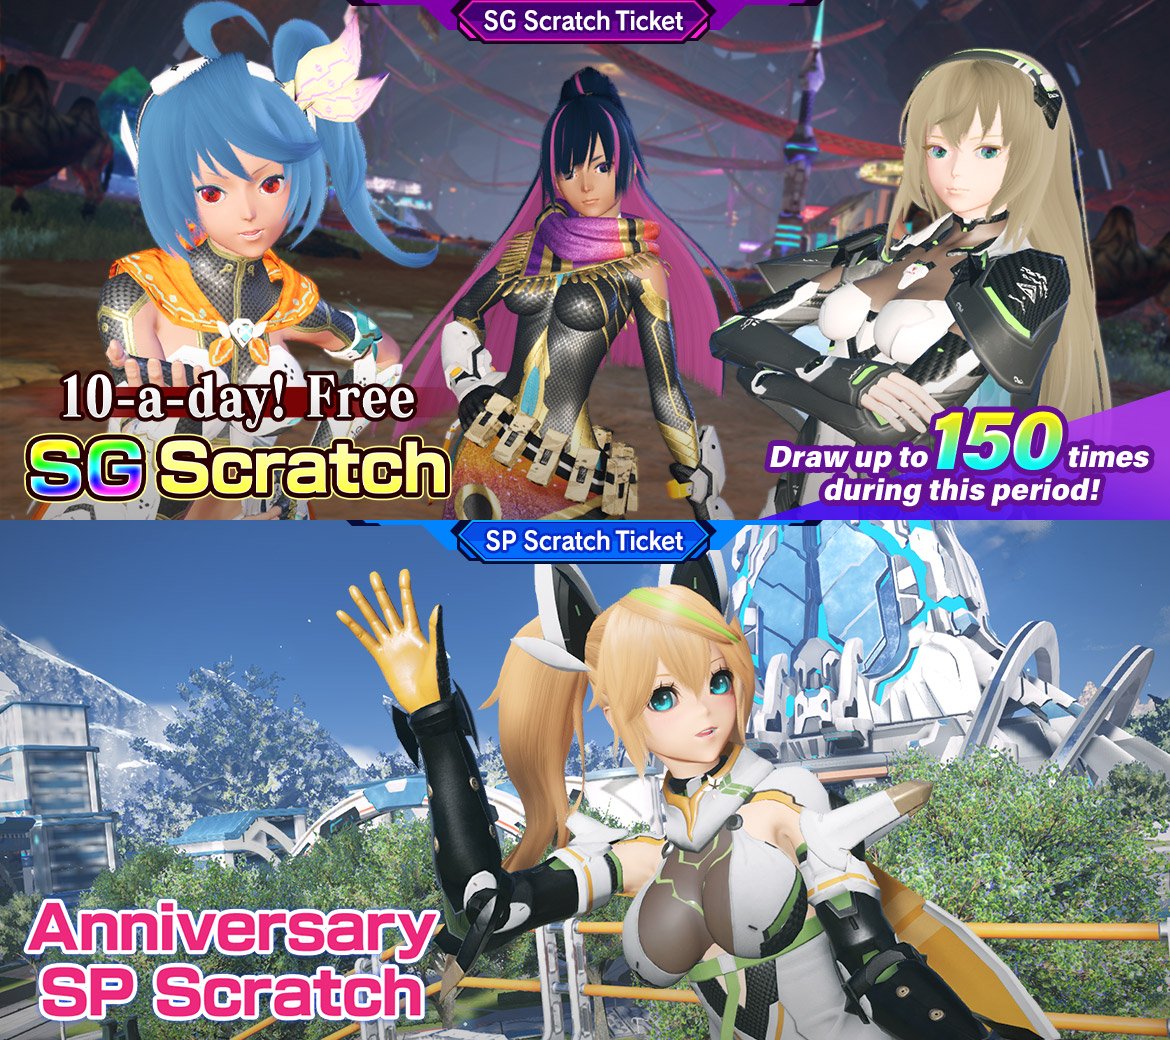 Celebrate Halpha's Super Origin Festival and the 3rd anniversary of #PSO2NGS with two new Scratch Ticket collections! 🎉💫✨ Get 10-a-day SG Scratch pulls and check out Anniversary SP Scratch, live in-game now! 💎